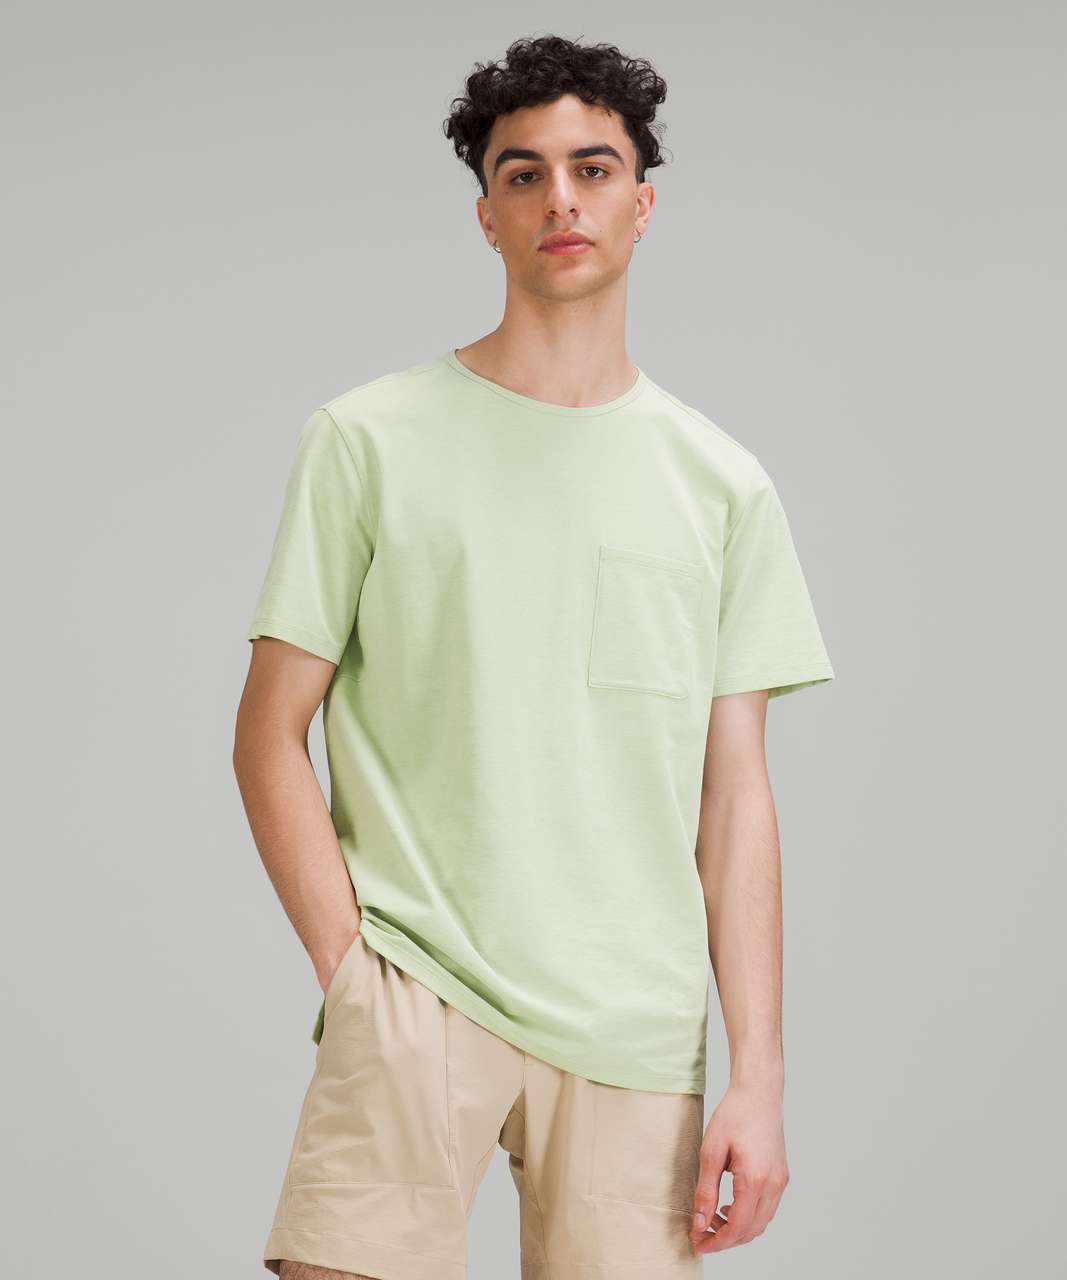 Lululemon Chest Pocket Relaxed Fit Tee *Oxford - Arctic Mint / White